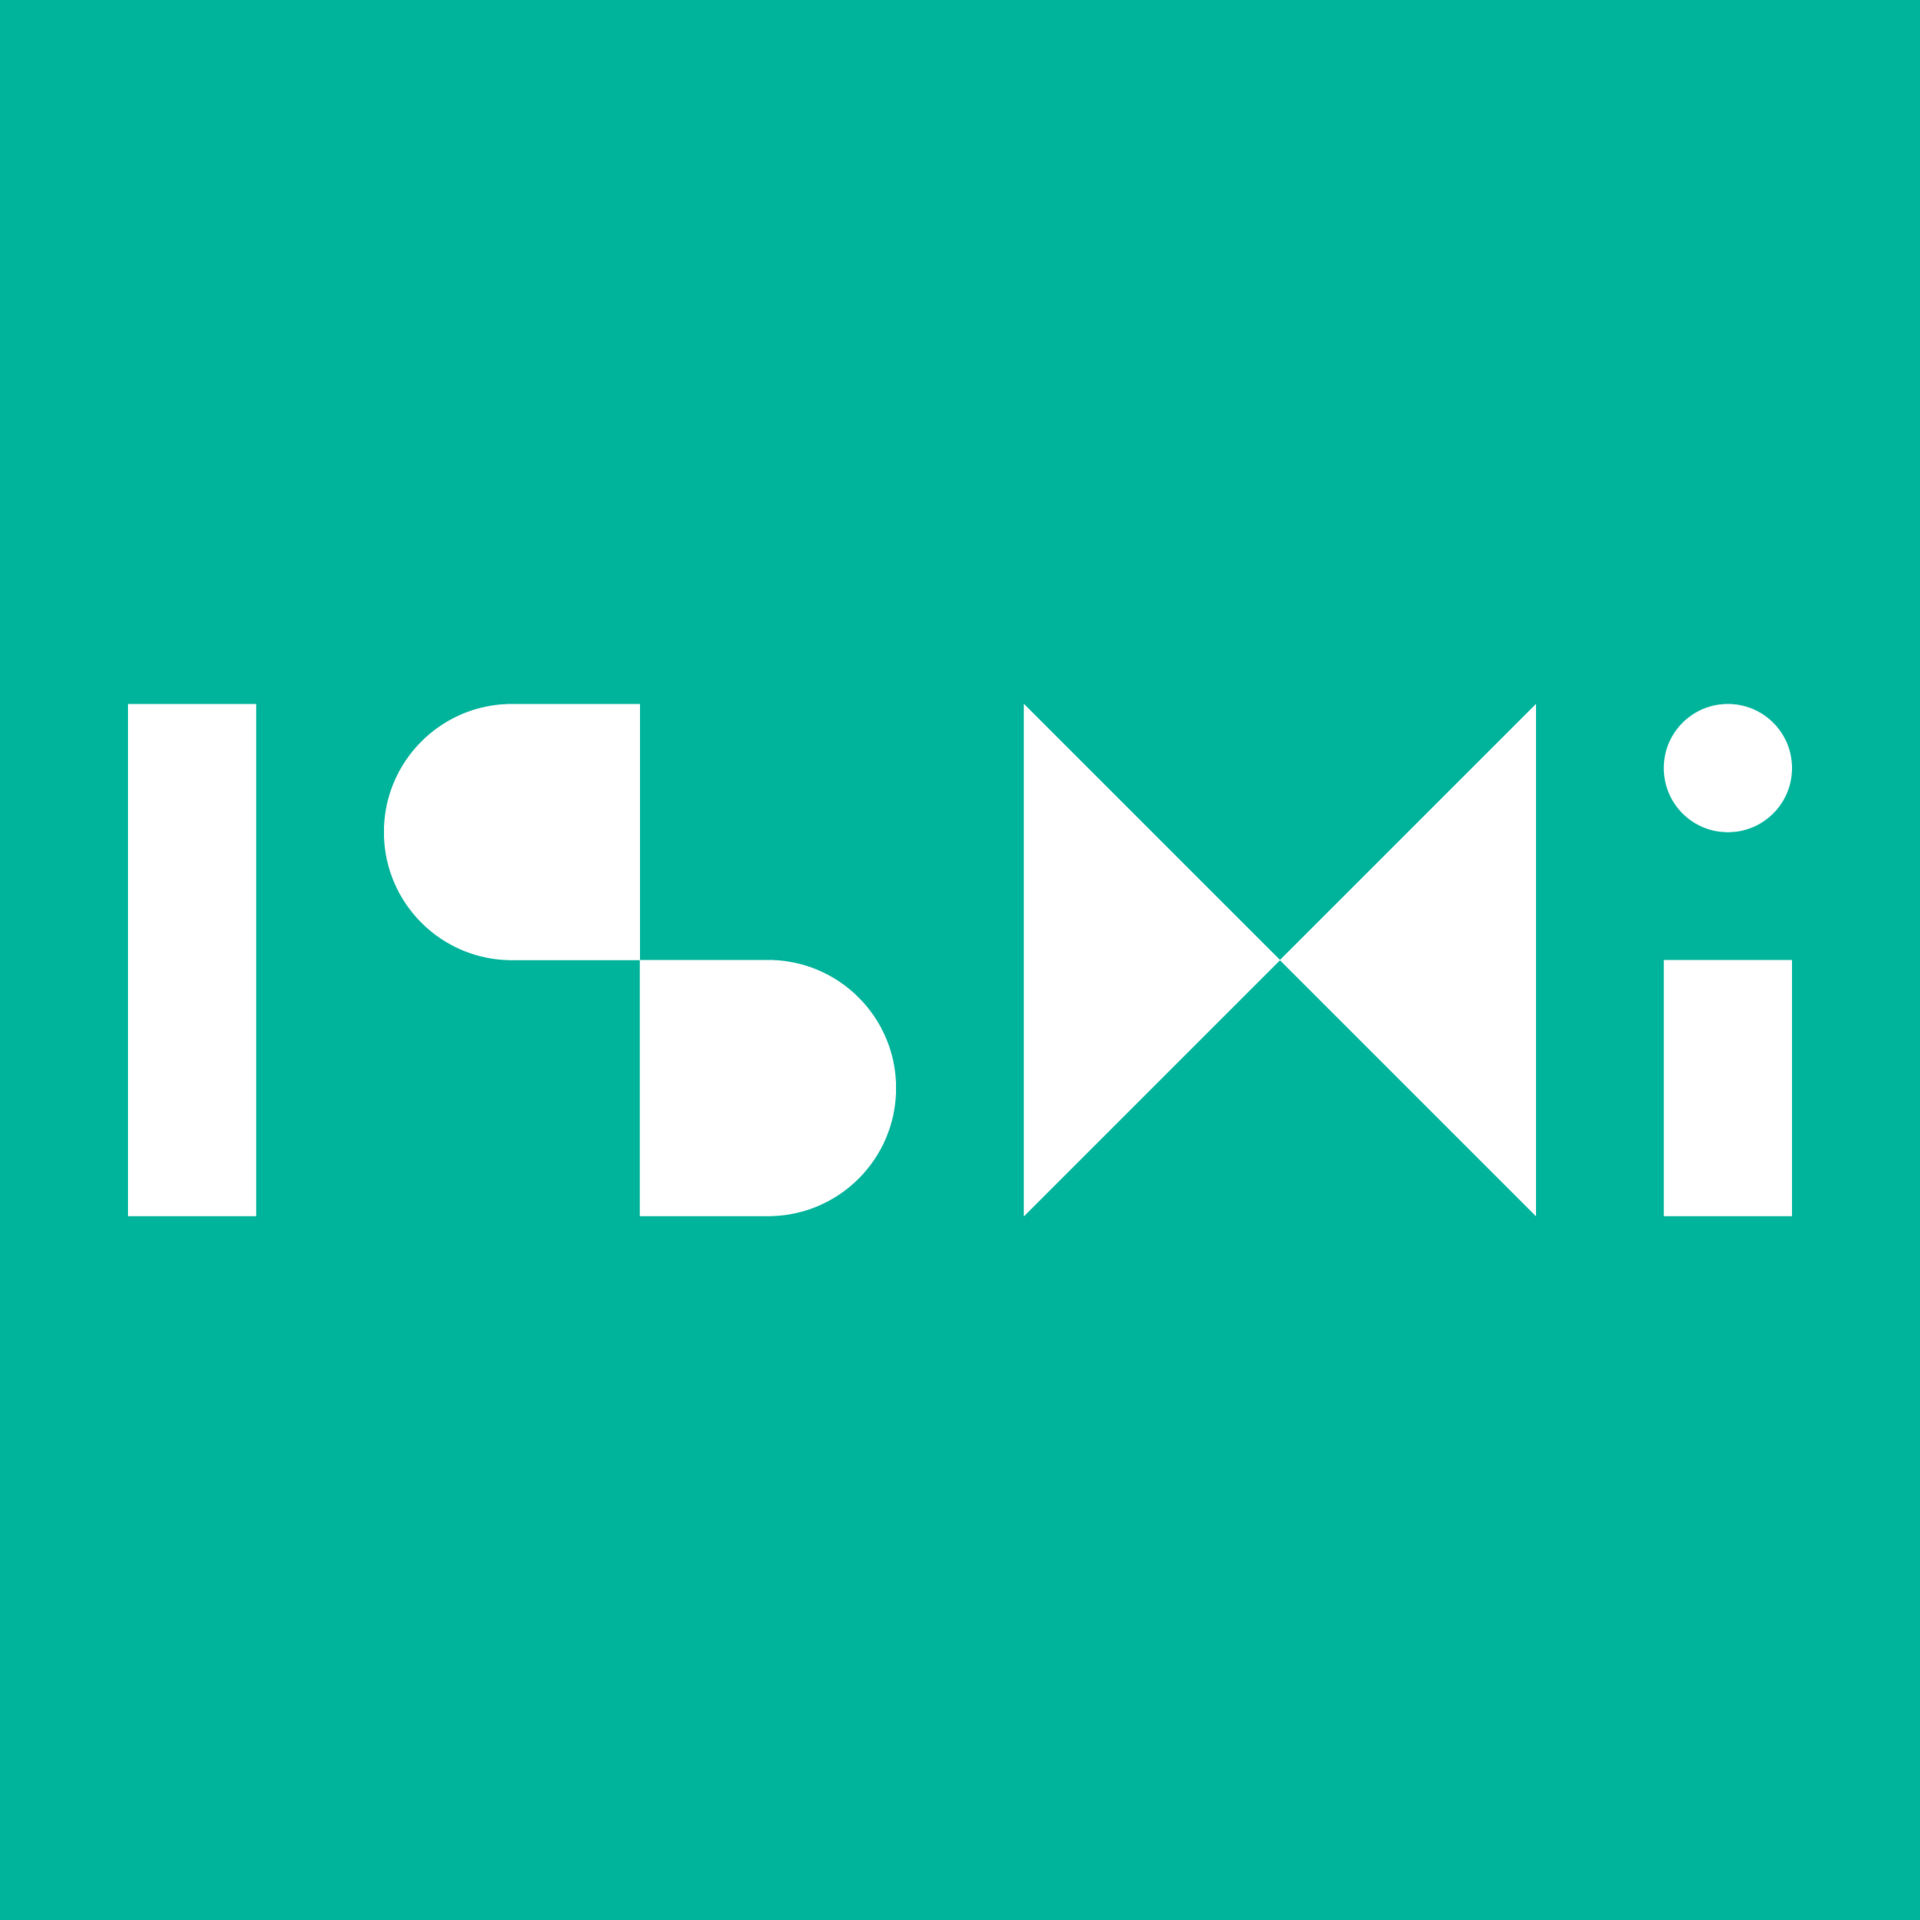 Logo, green square with ISMI in white letters.